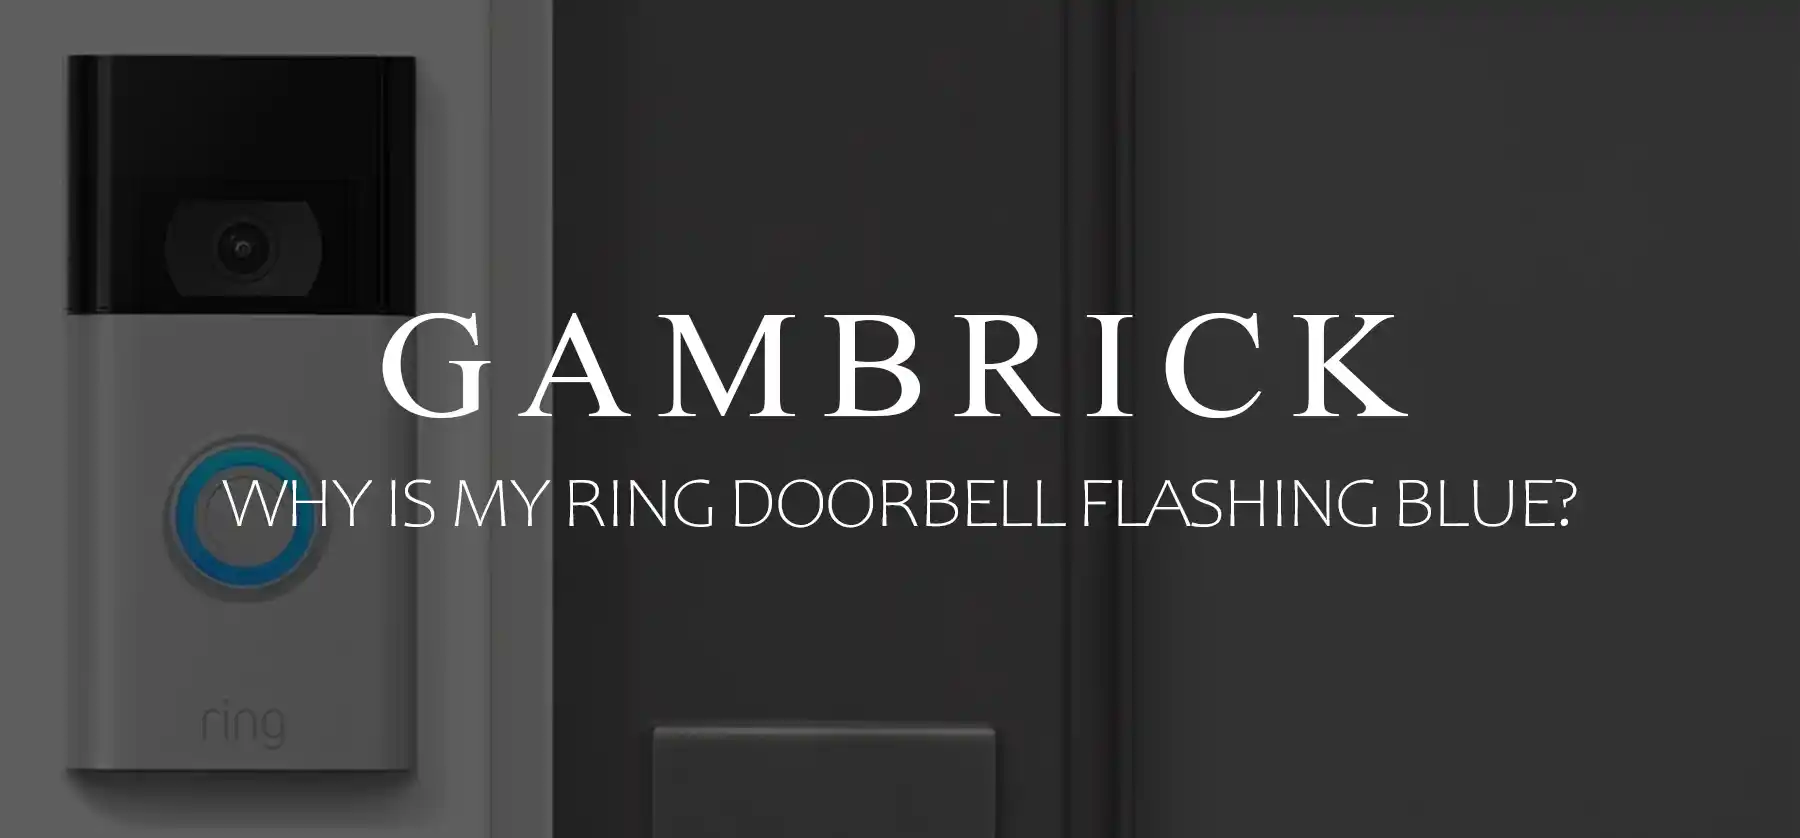 why is my ring doorbell flashing blue banner 1.0